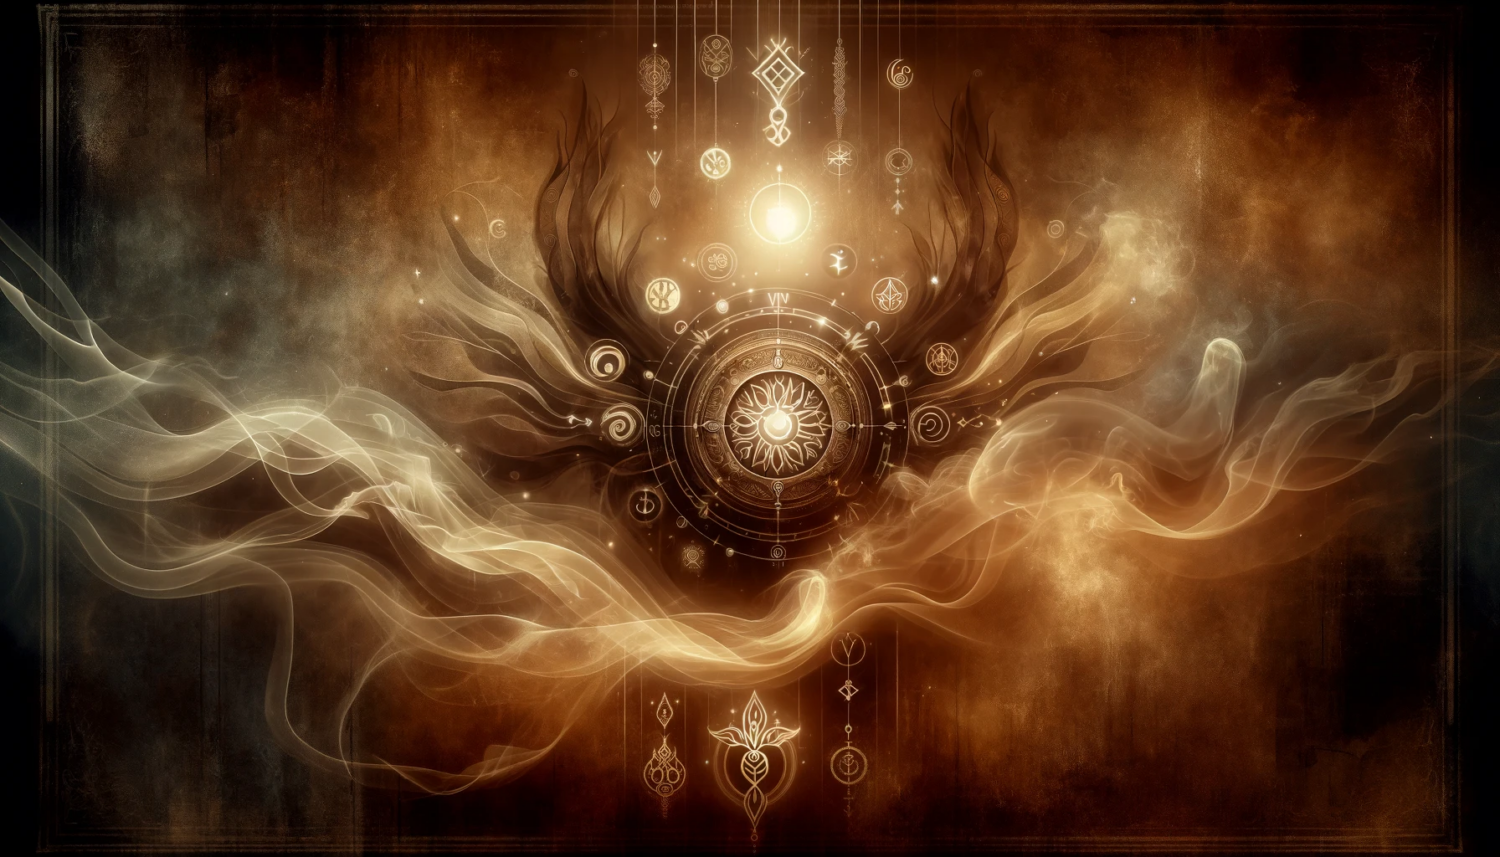 Visualize a metaphysical protection scene in a banner format with an overall brownish hue. The image should feature an ancient, mystical shield, glowing with ethereal light, at the center. Around the shield, there are swirling, misty forms of protective symbols and runes, emanating a sense of calm and strength. These symbols are drawn from various ancient cultures, blending together harmoniously. The background should be a deep, rich brown, with subtle hints of gold and amber, suggesting an aura of timeless protection. The atmosphere should be serene and powerful, conveying a sense of safety and mystical guardianship.